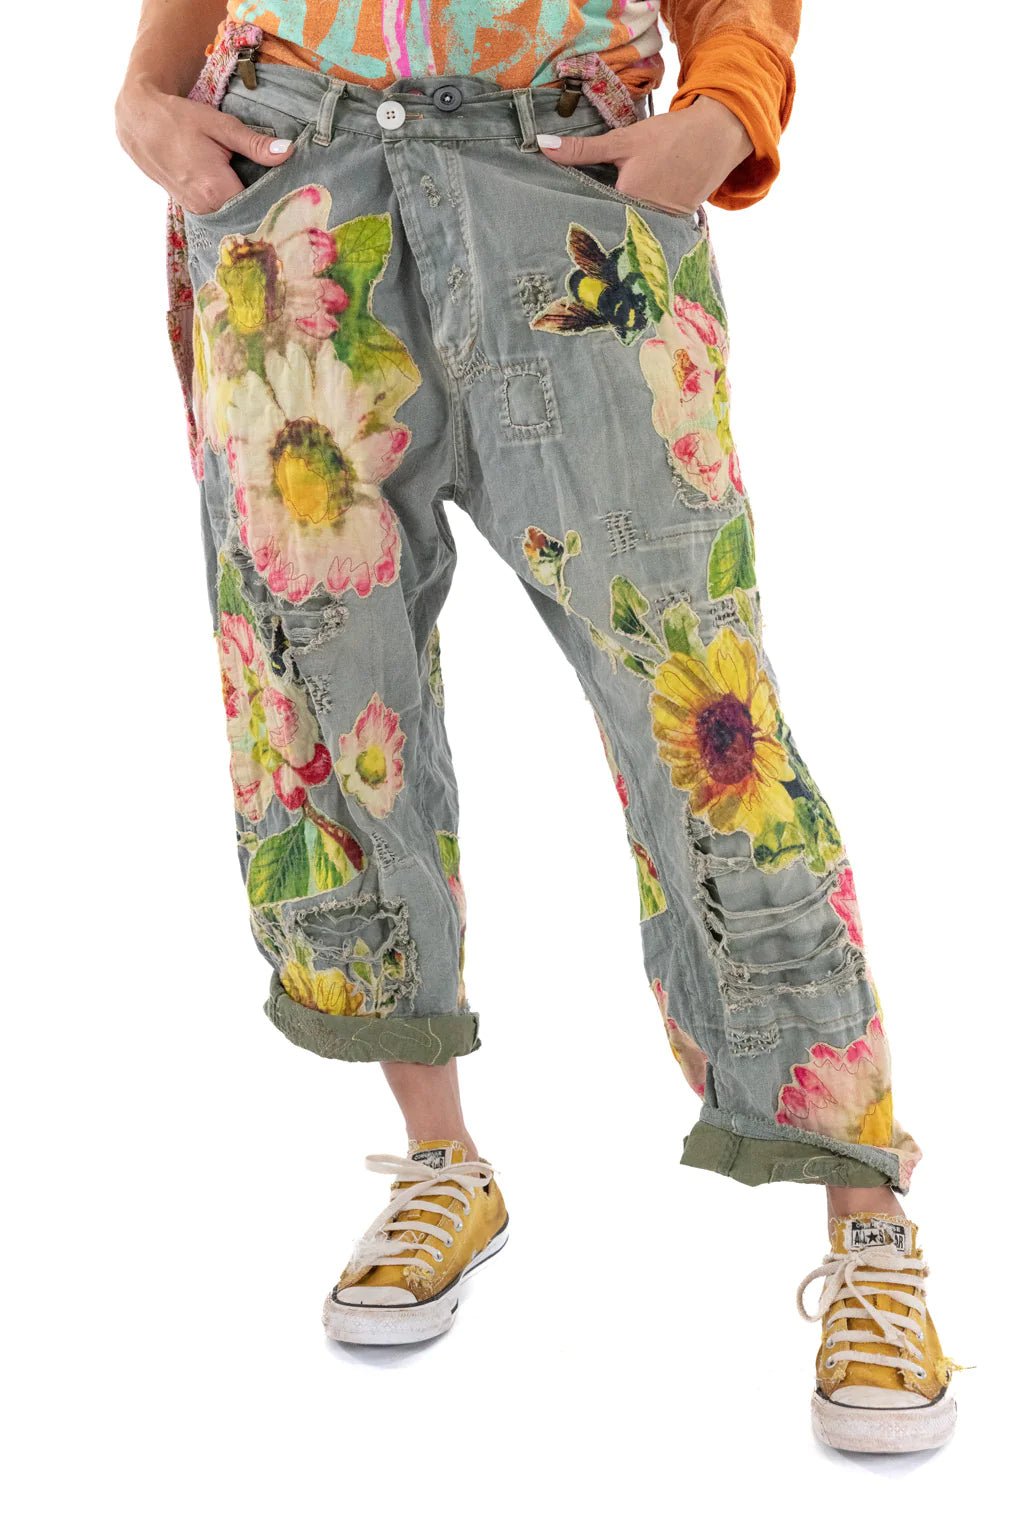 Magnolia Pearl Miner Pants with Sunflower - Katze Boutique